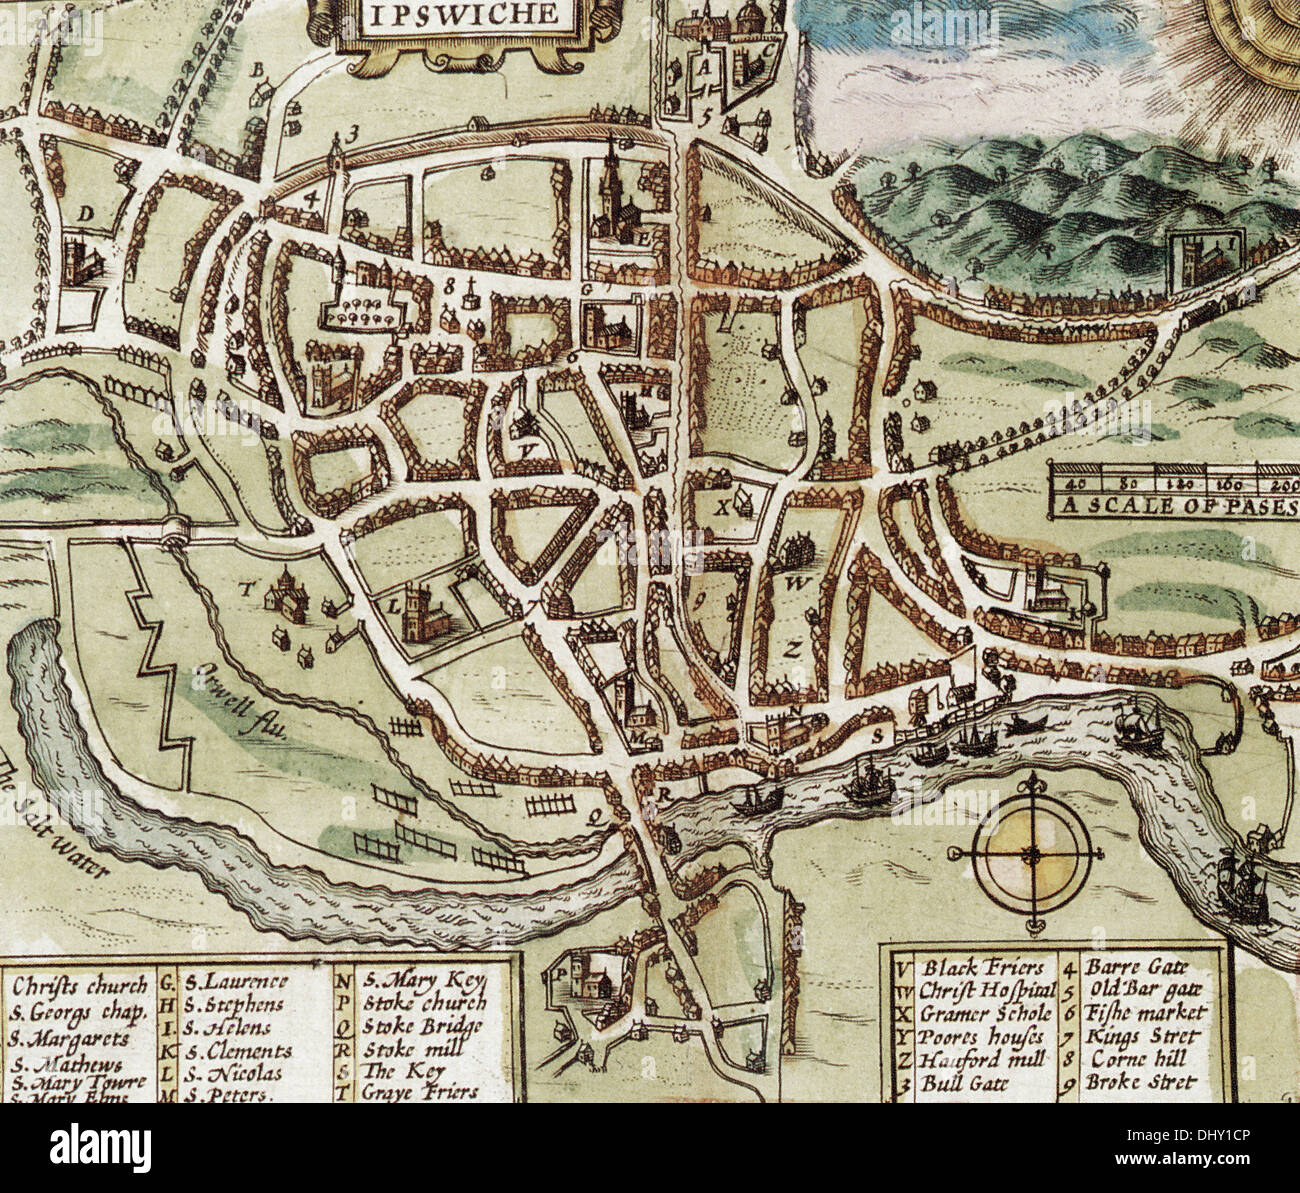 Old Map Of Ipswich England By John Speed 1611 DHY1CP 